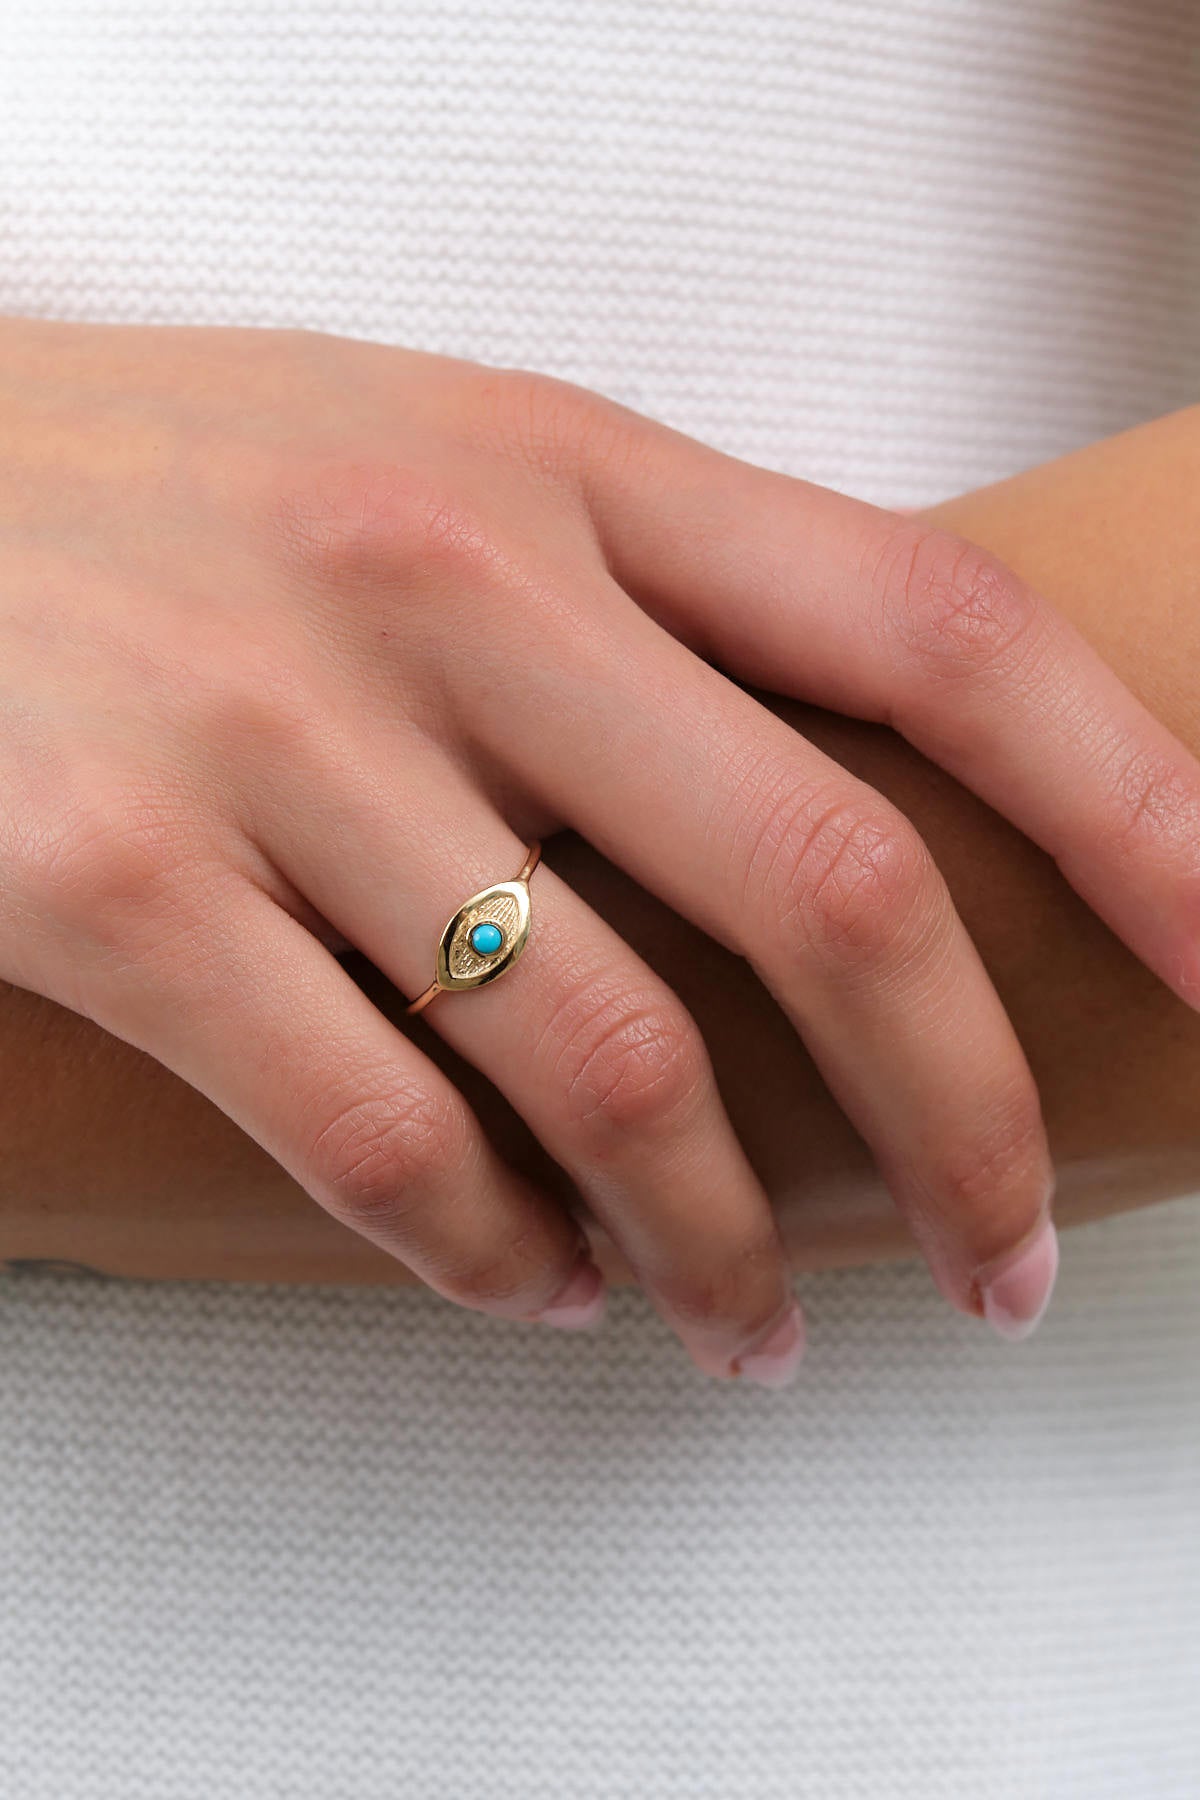 Mini Gold Evil Eye Ring by Carrie Hoffman with Turquoise